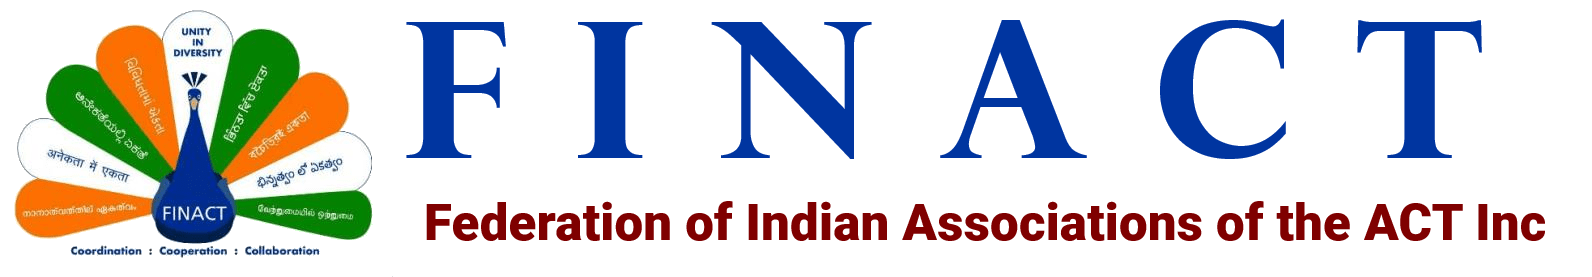 Federation of Indian Associations of ACT Inc